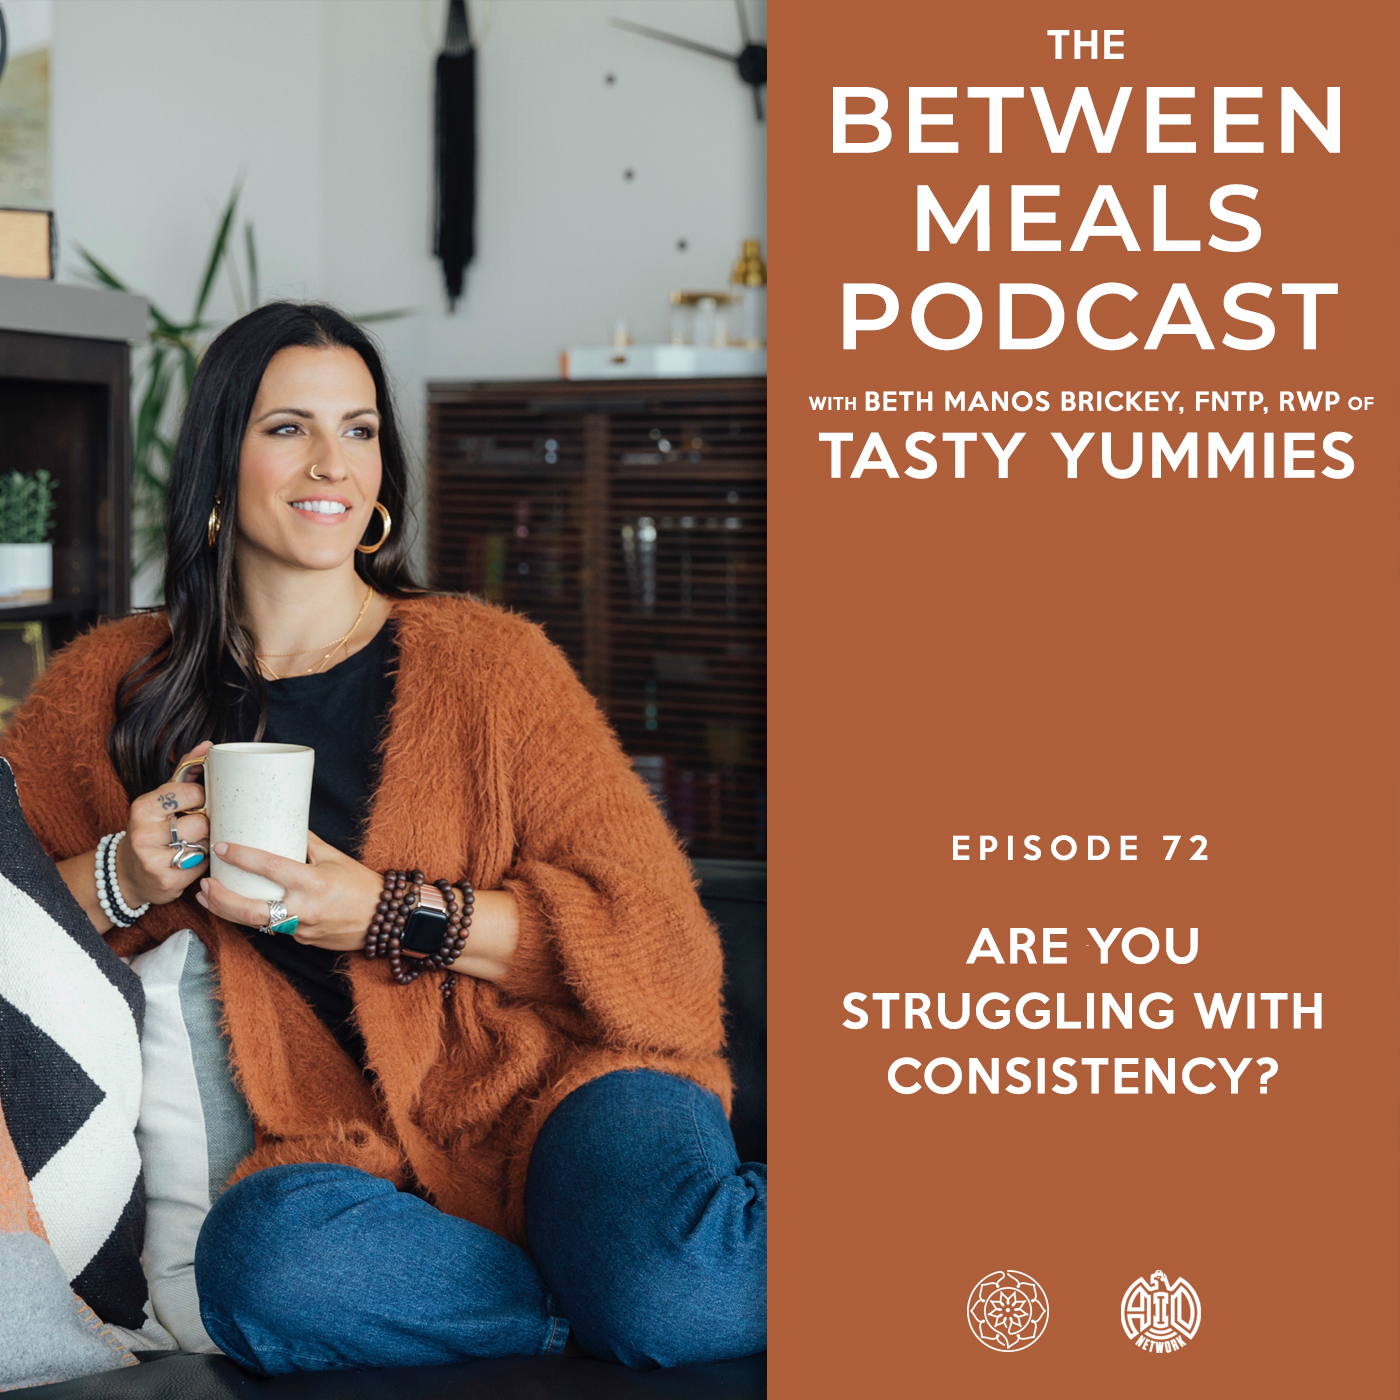 Between Meals Podcast. Episode 72: Are You Struggling With Consistency"